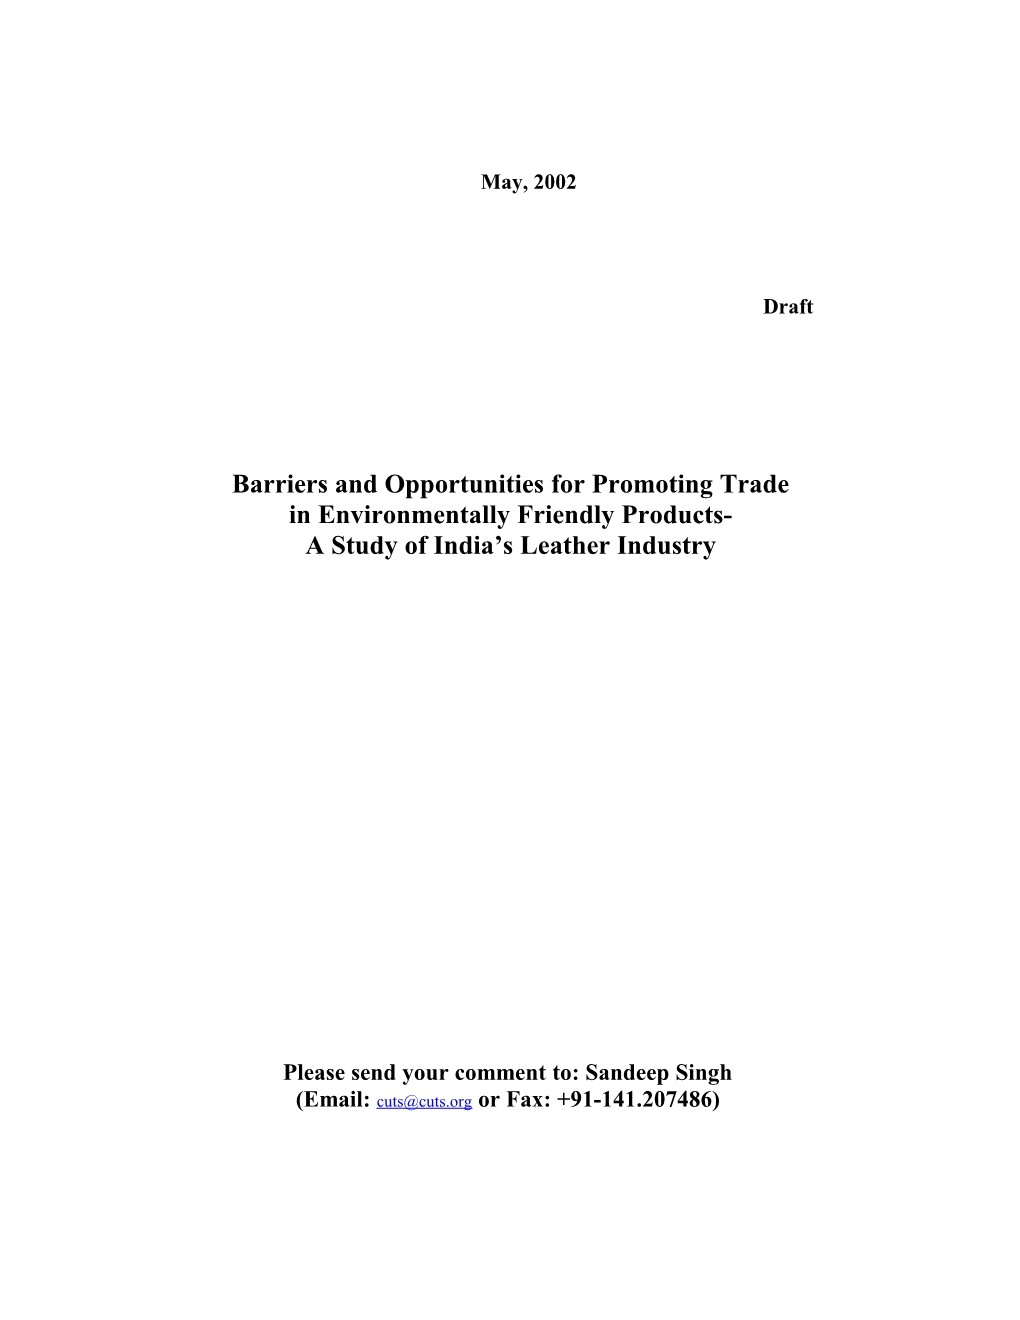 Barriers and Opportunities for Promoting Trade